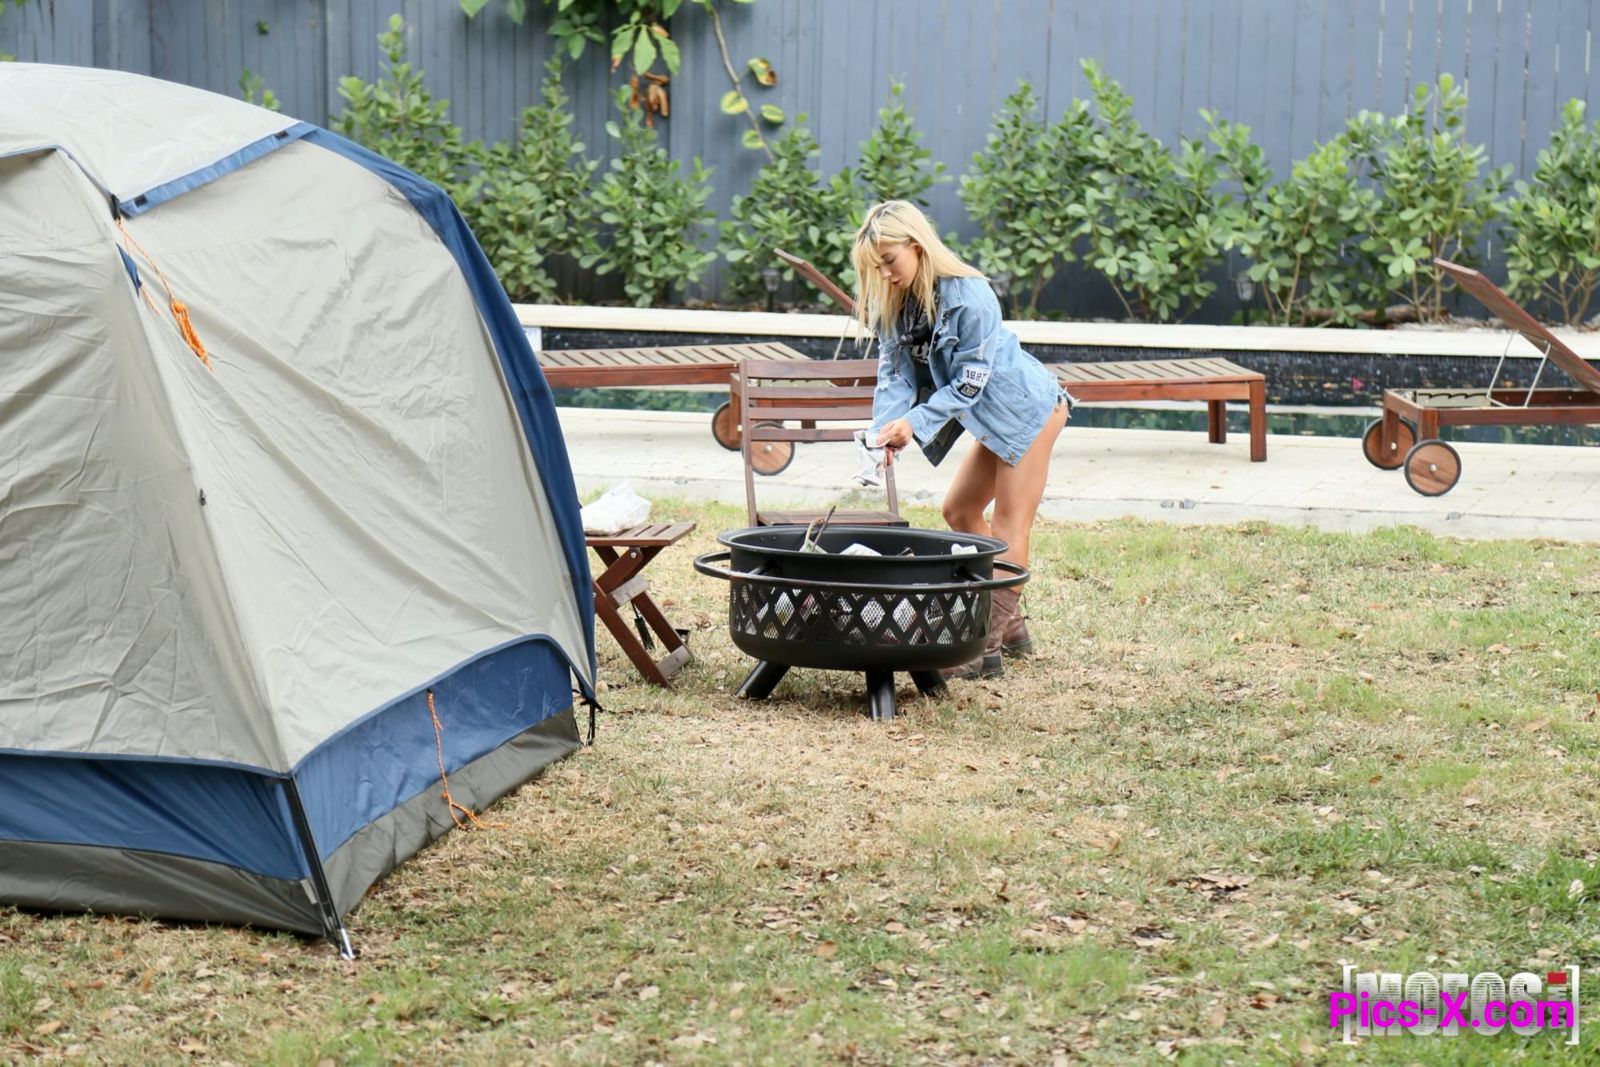 Backyard Camping for Hottie on House Arrest - Pervs On Patrol - Image 1